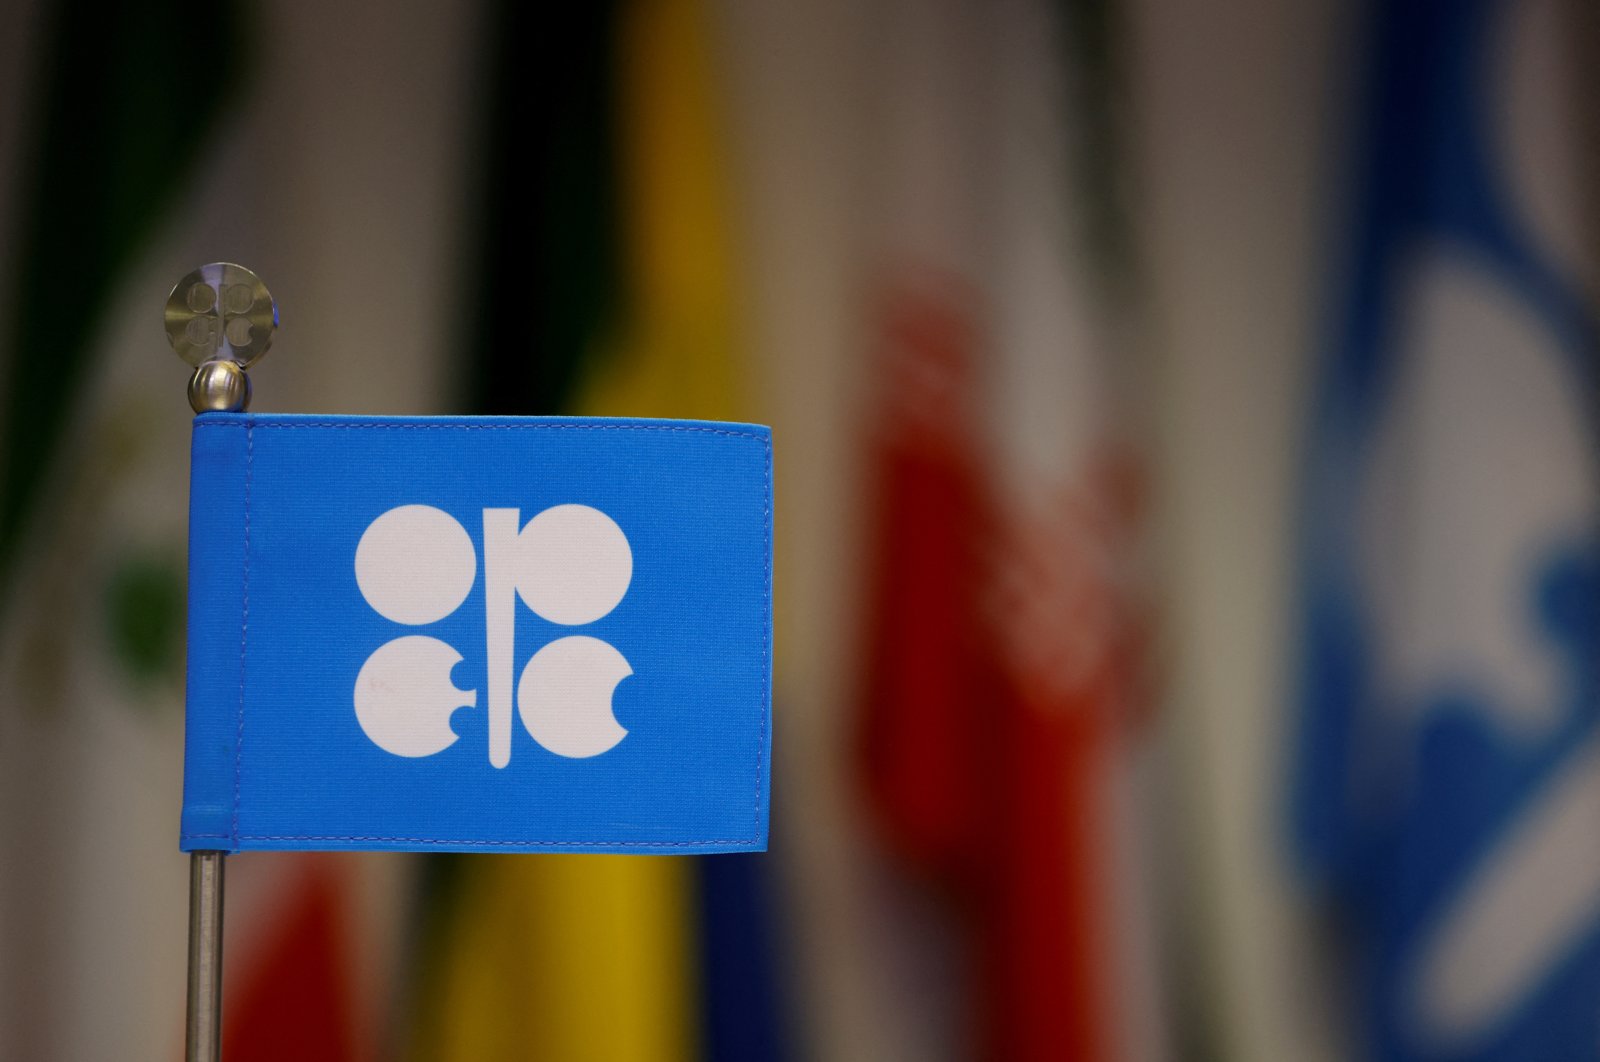 An OPEC flag is seen on the day of an OPEC+ meeting in Vienna, Austria, Oct. 5, 2022. (Reuters Photo)